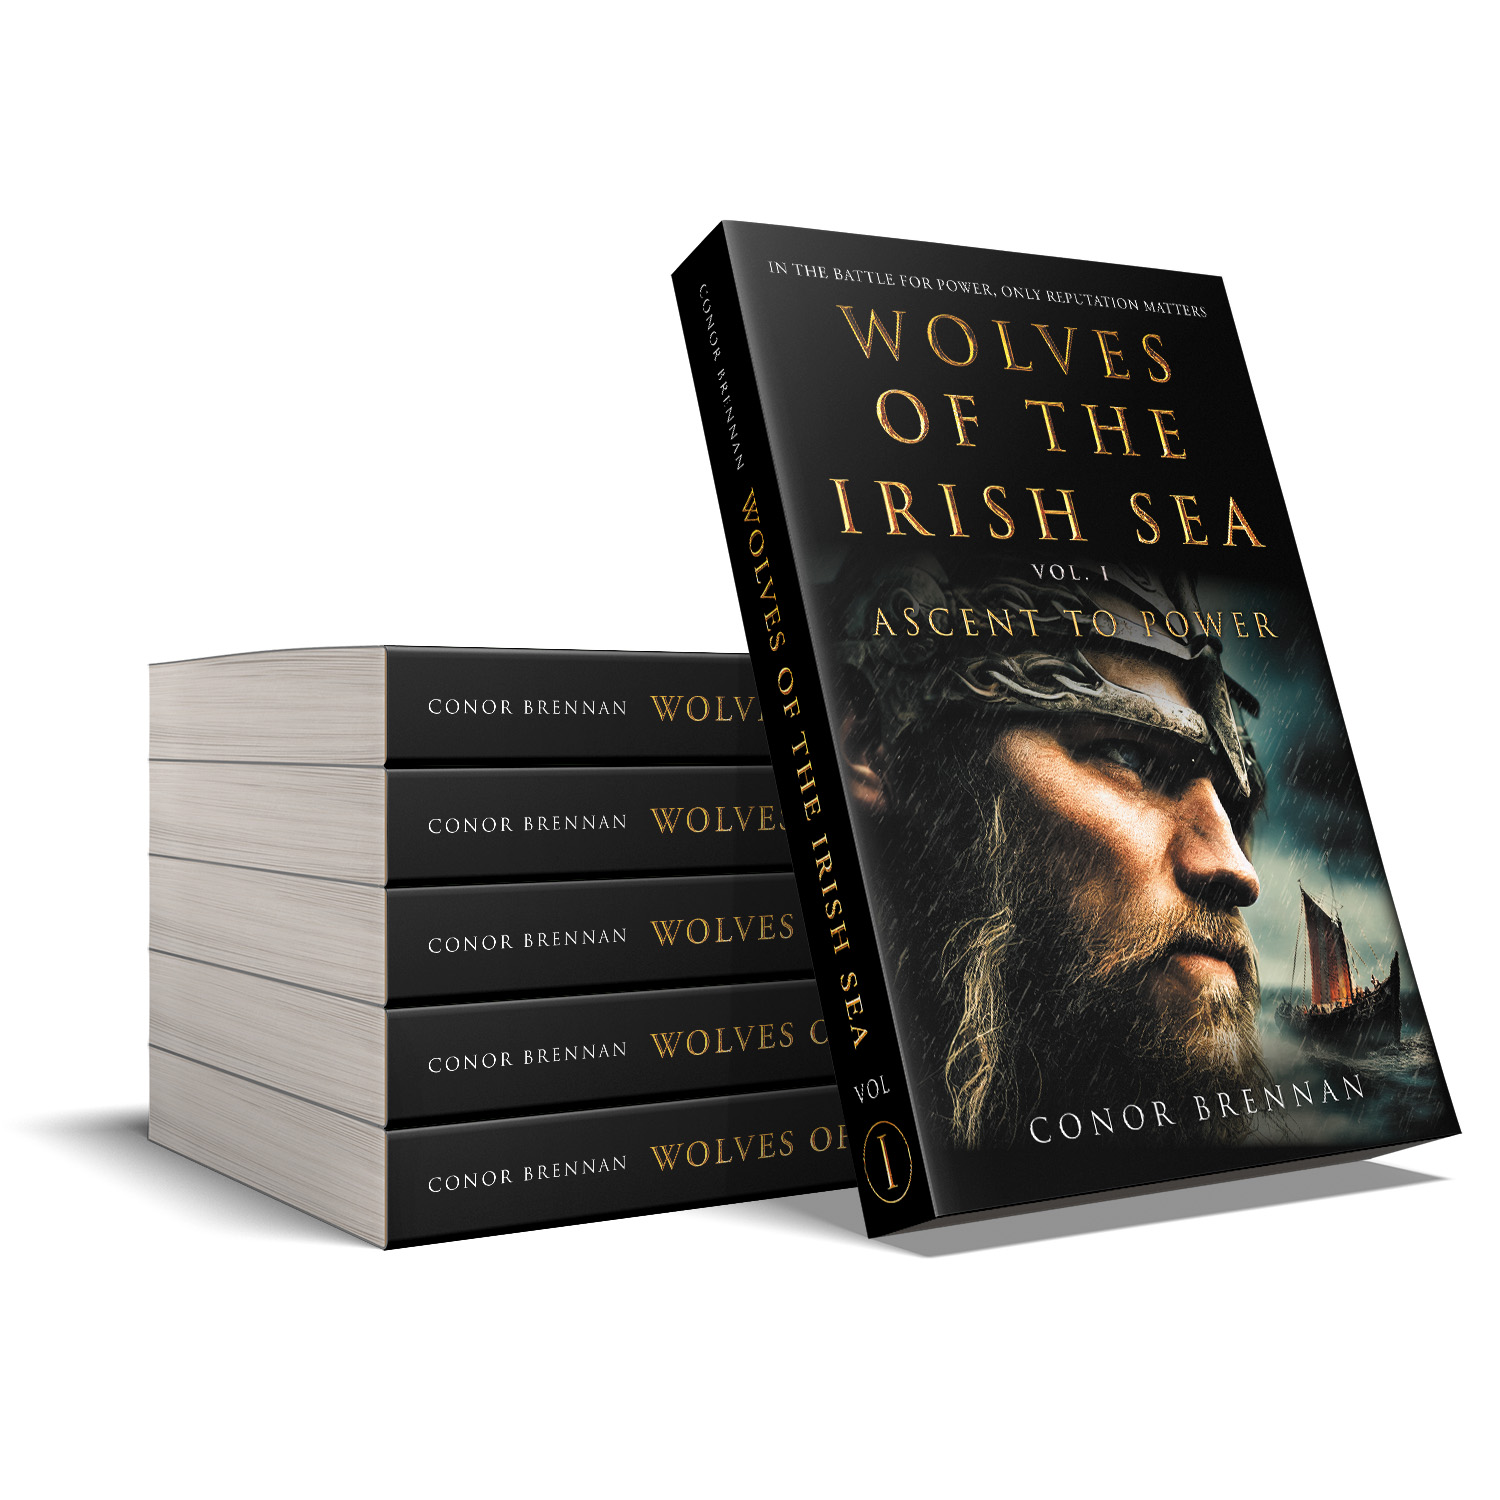 'Wolves of the Irish Sea' is a dark and epic historical fiction series. The author is Conor Brennan. The book cover and interior design are by Mark Thomas. To learn more about what Mark could do for your book, please visit coverness.com.